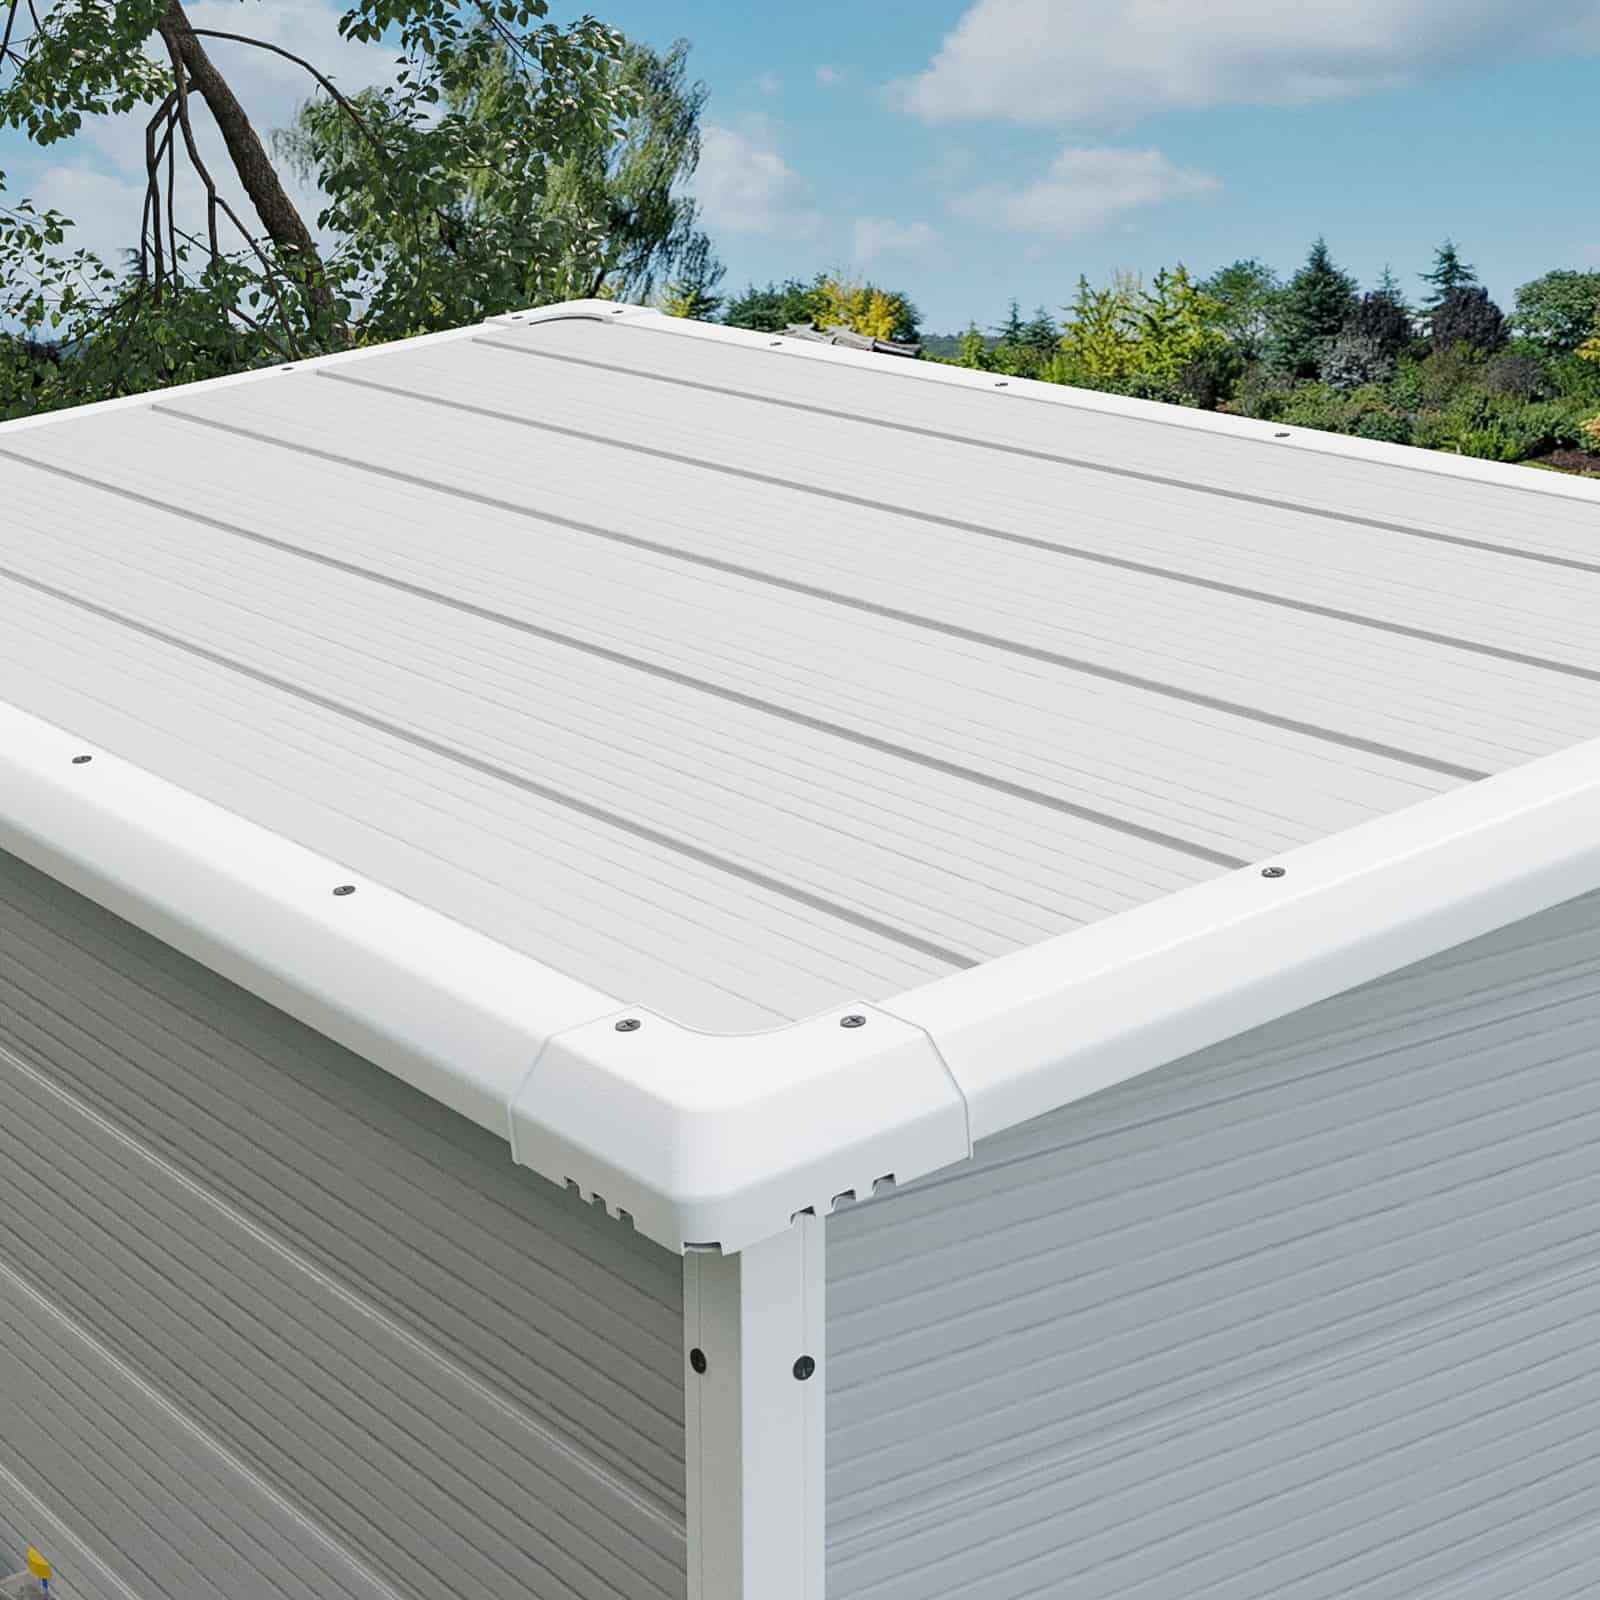 Patiowell 5x3 Plastic Shed-Roof